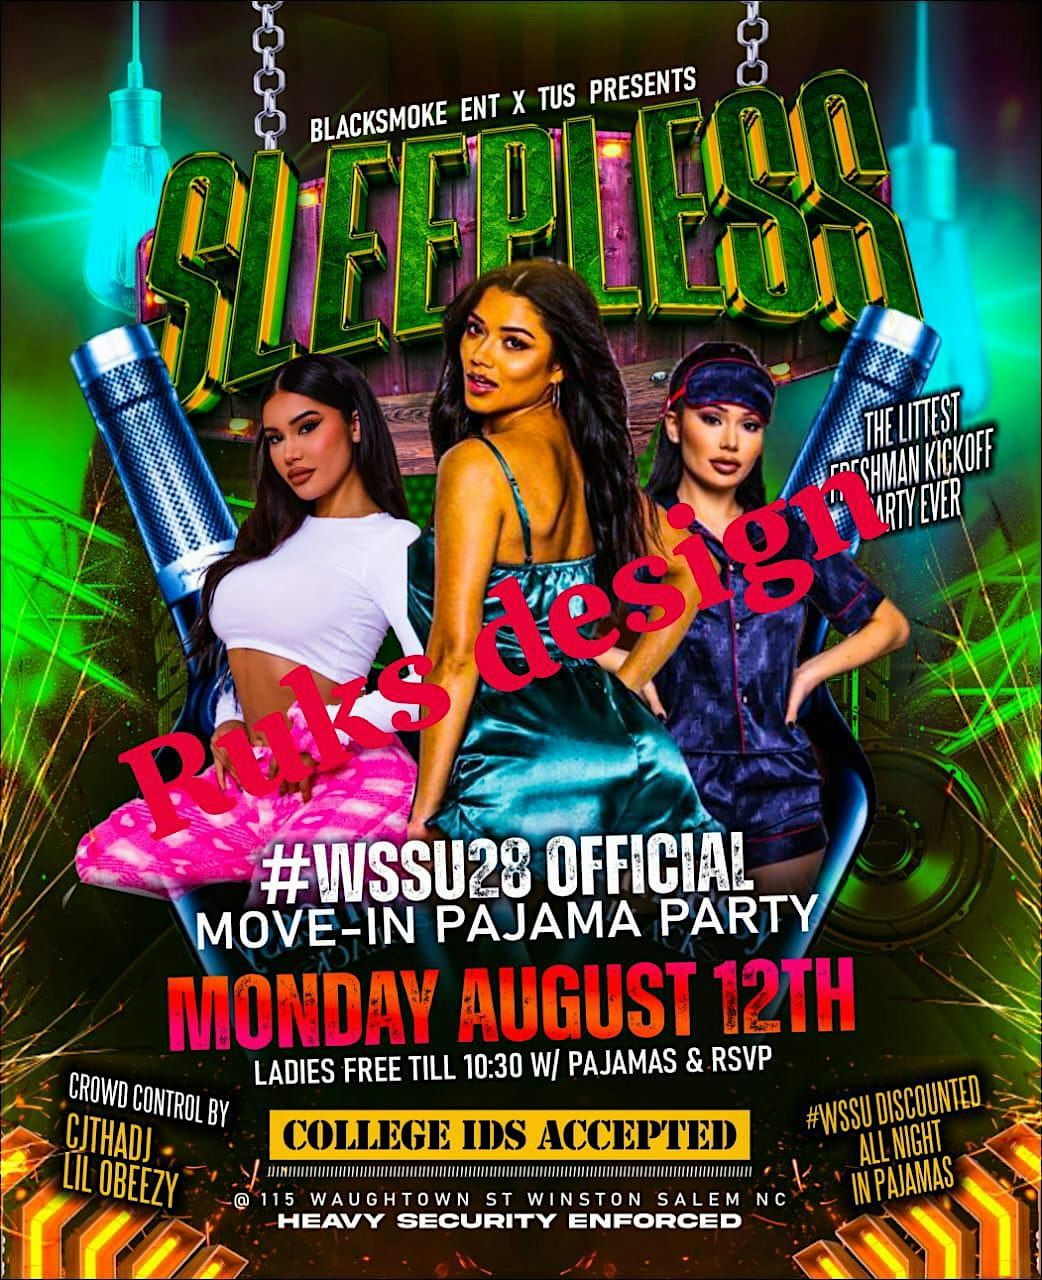 THE RAMILY XPERIENCE : SLEEPLESS #WSSU28 MOVE- IN PAJAMA PARTY